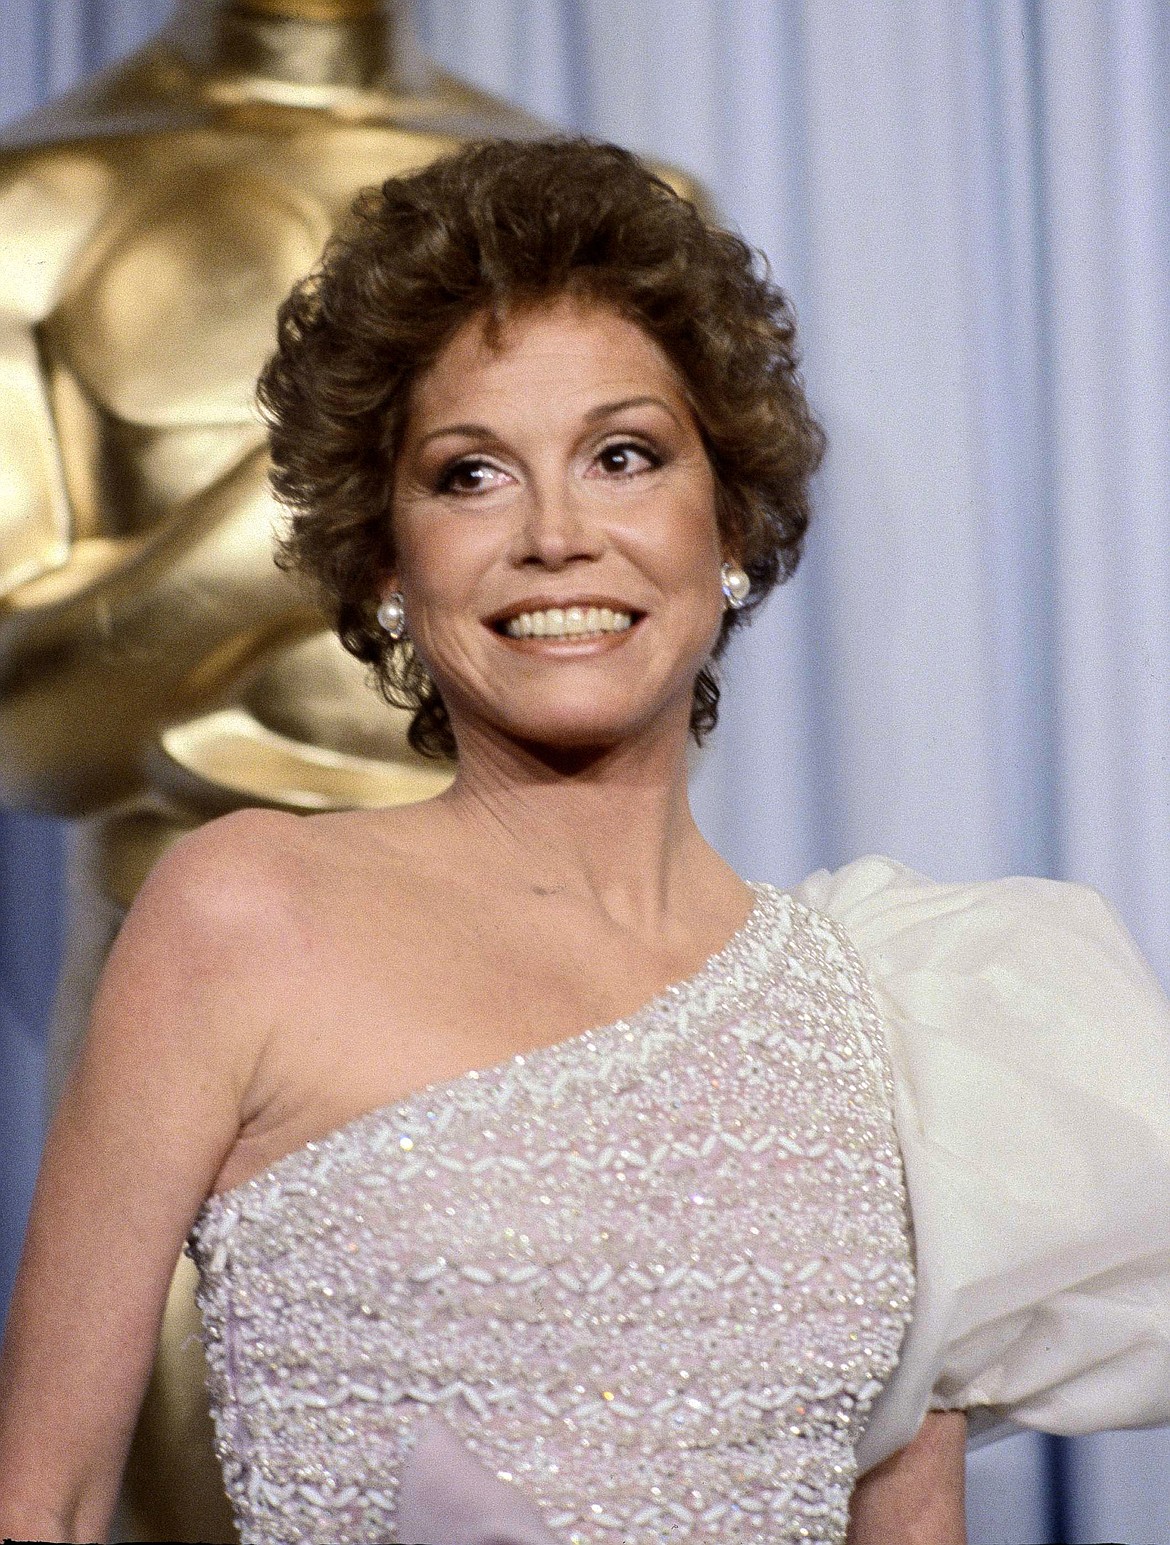 FILE - This March 31, 1981 file photo shows Mary Tyler Moore at the 53rd Academy Awards in Los Angeles. Moore, nominated for Best Actress for her film &quot;Ordinary People,&quot; lost out to Sissy Spacek for &quot;Coal Miner's Daughter.&quot;  Moore died Wednesday, Jan. 25, 2017, at age 80. (AP Photo/Randy Rasmussen, File)